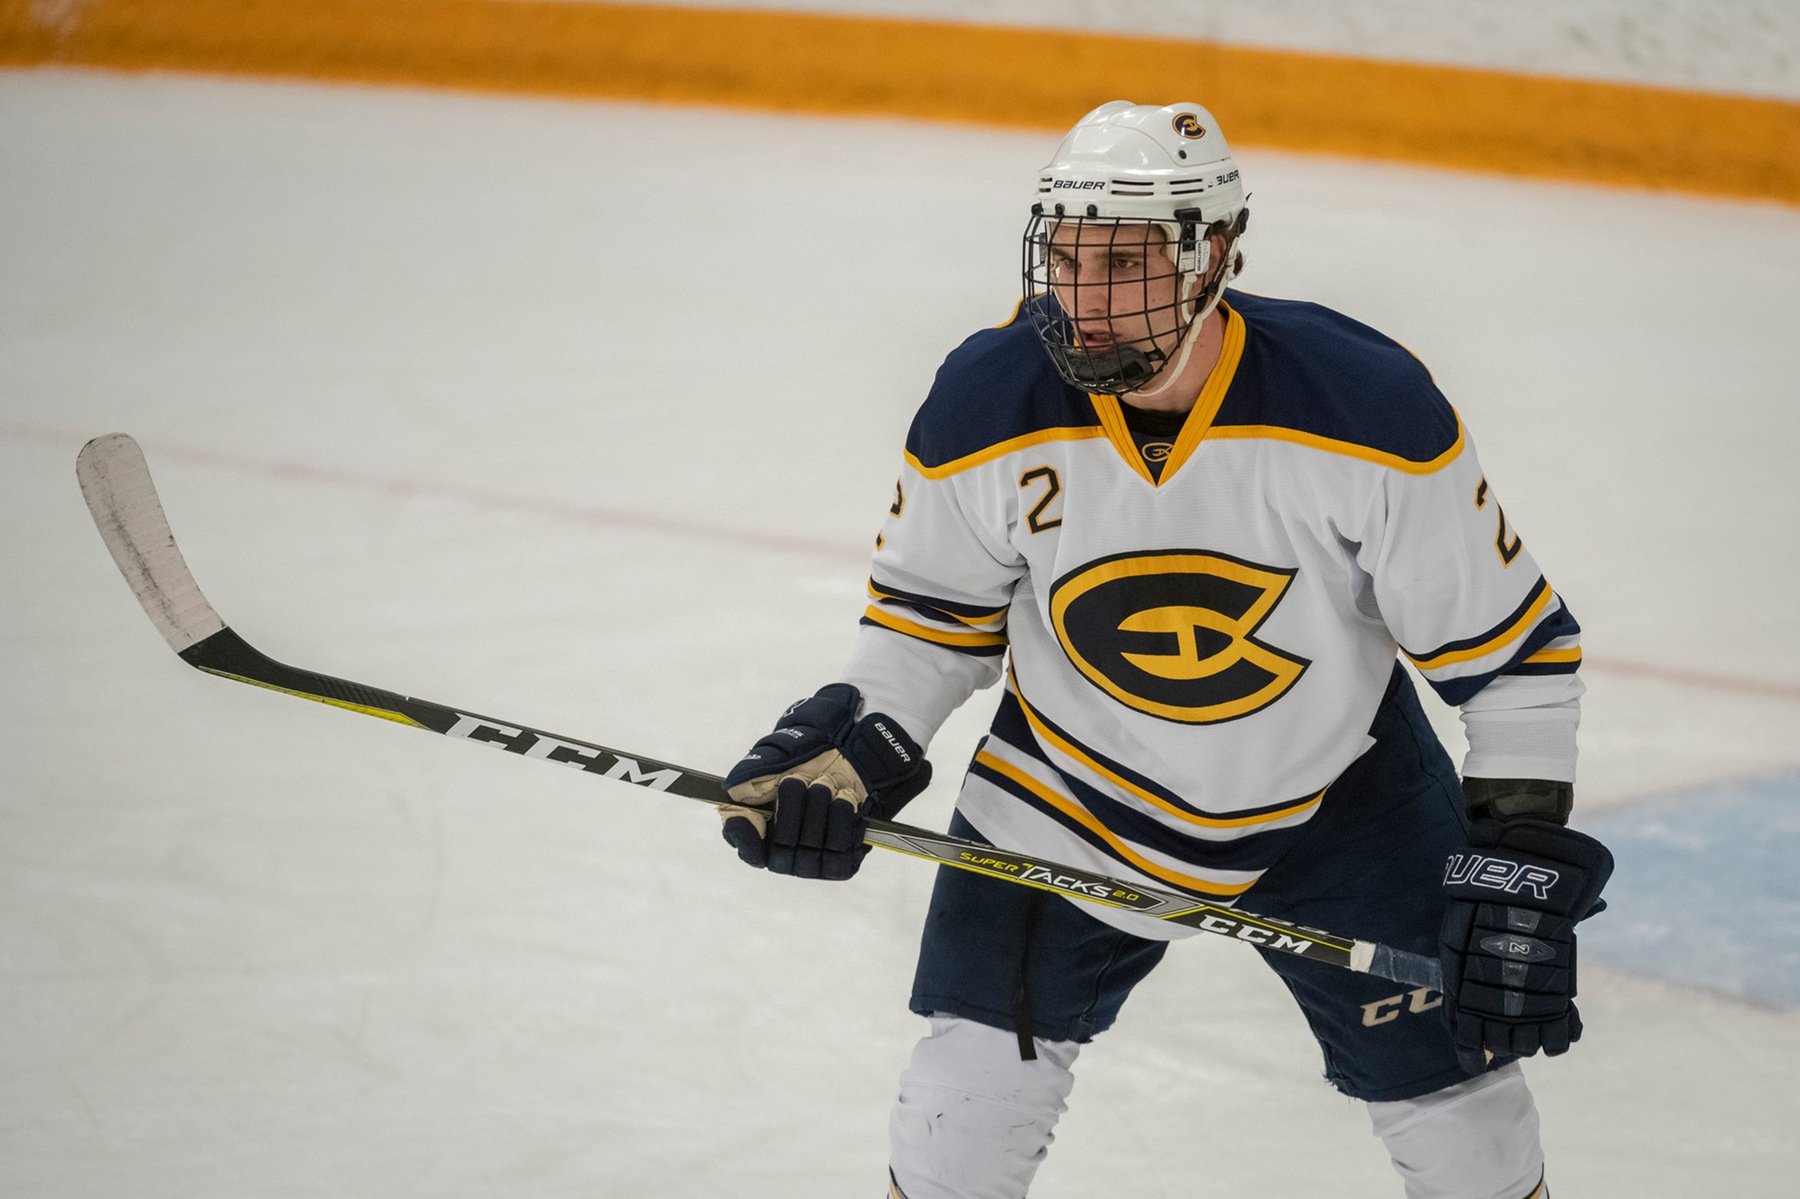 Bresser tallies two goals in win over St. Olaf